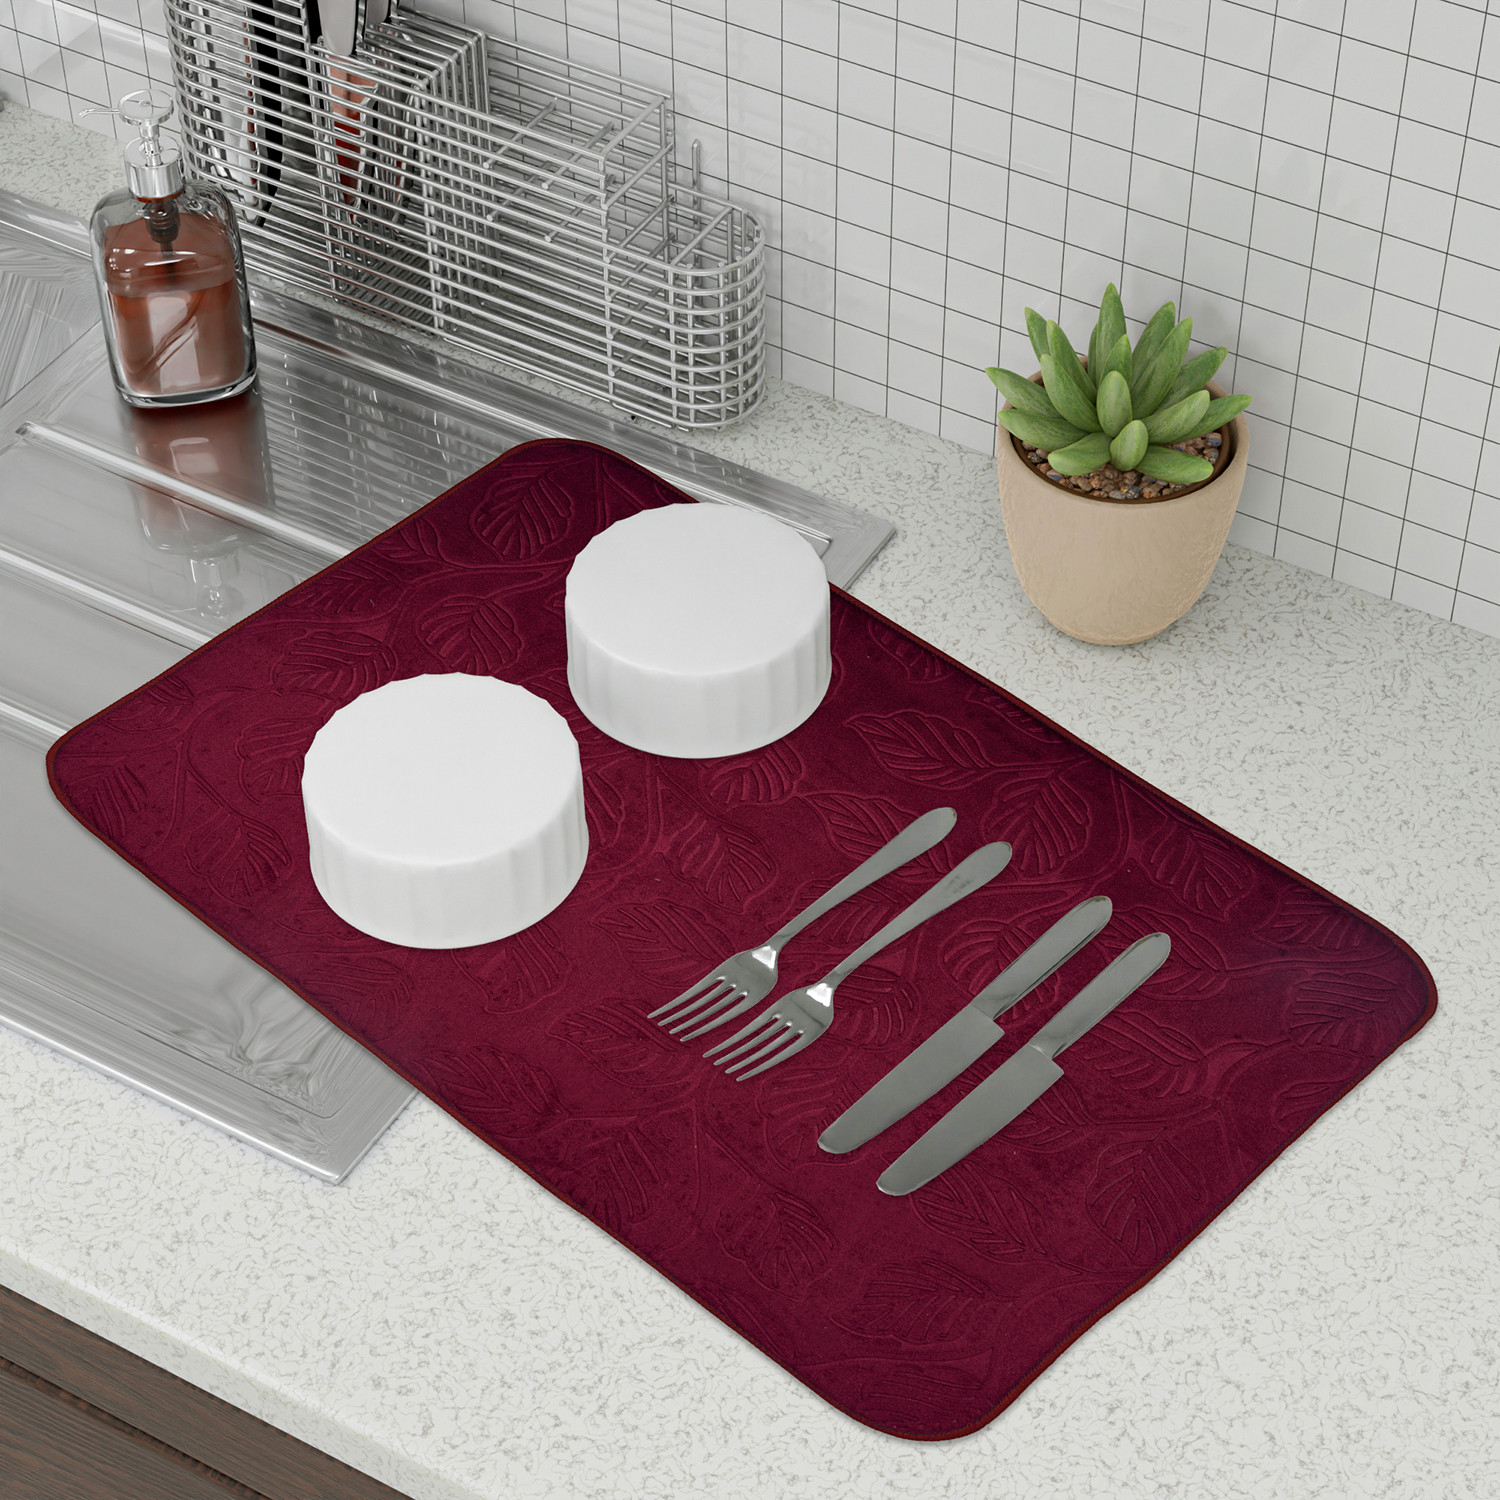 Kuber Industries Dish Dry Mat | Microfiber Self Drying Mat | Kitchen Drying Mat | Water Absorbent Kitchen Mat | Embossed Dish Dry Mat | 38x50 | Pack of 2 | Maroon & Brown